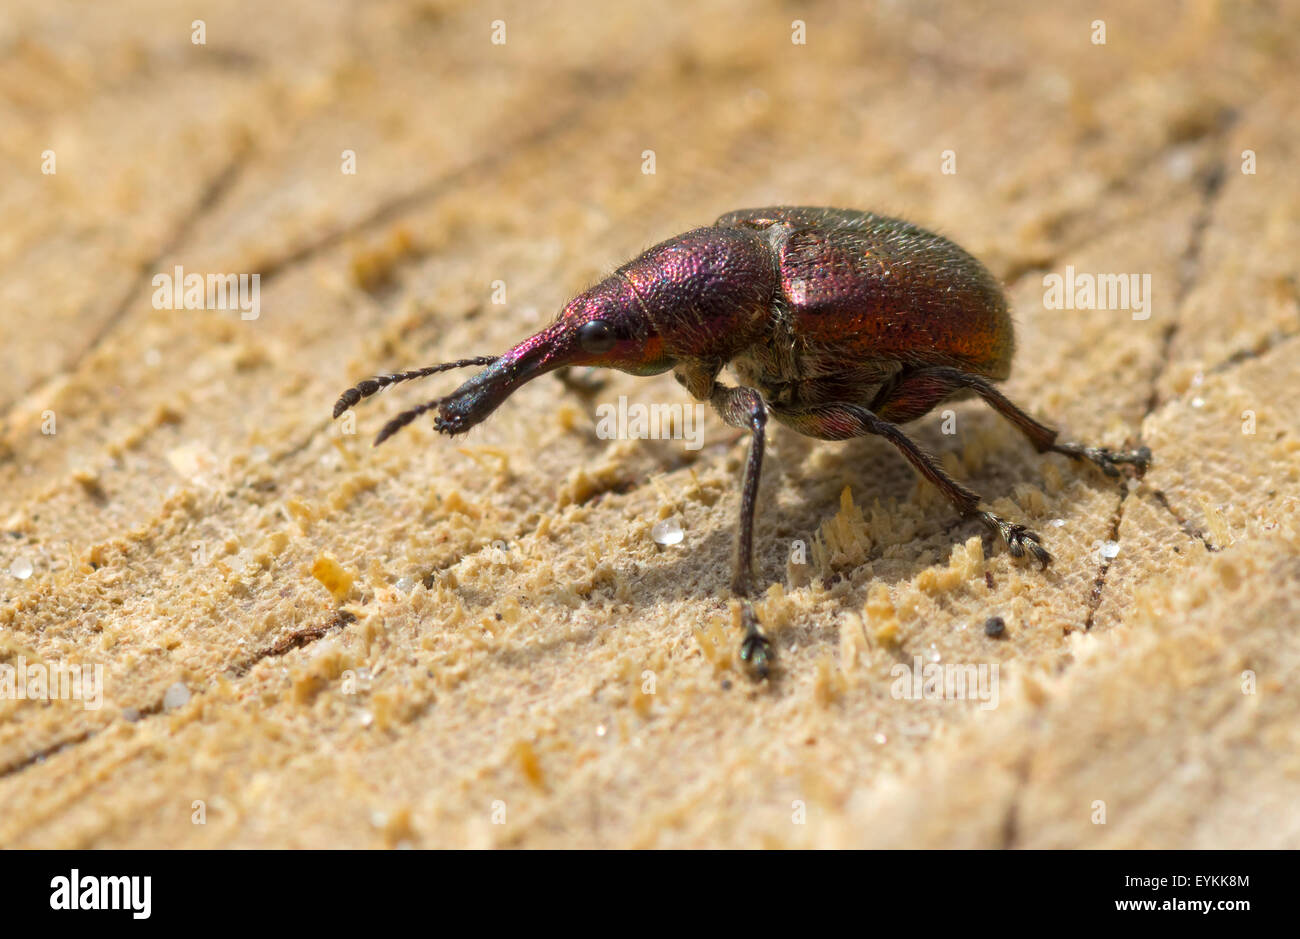 Weevil beetle (Curculionidae) demonstrates its sideview Stock Photo